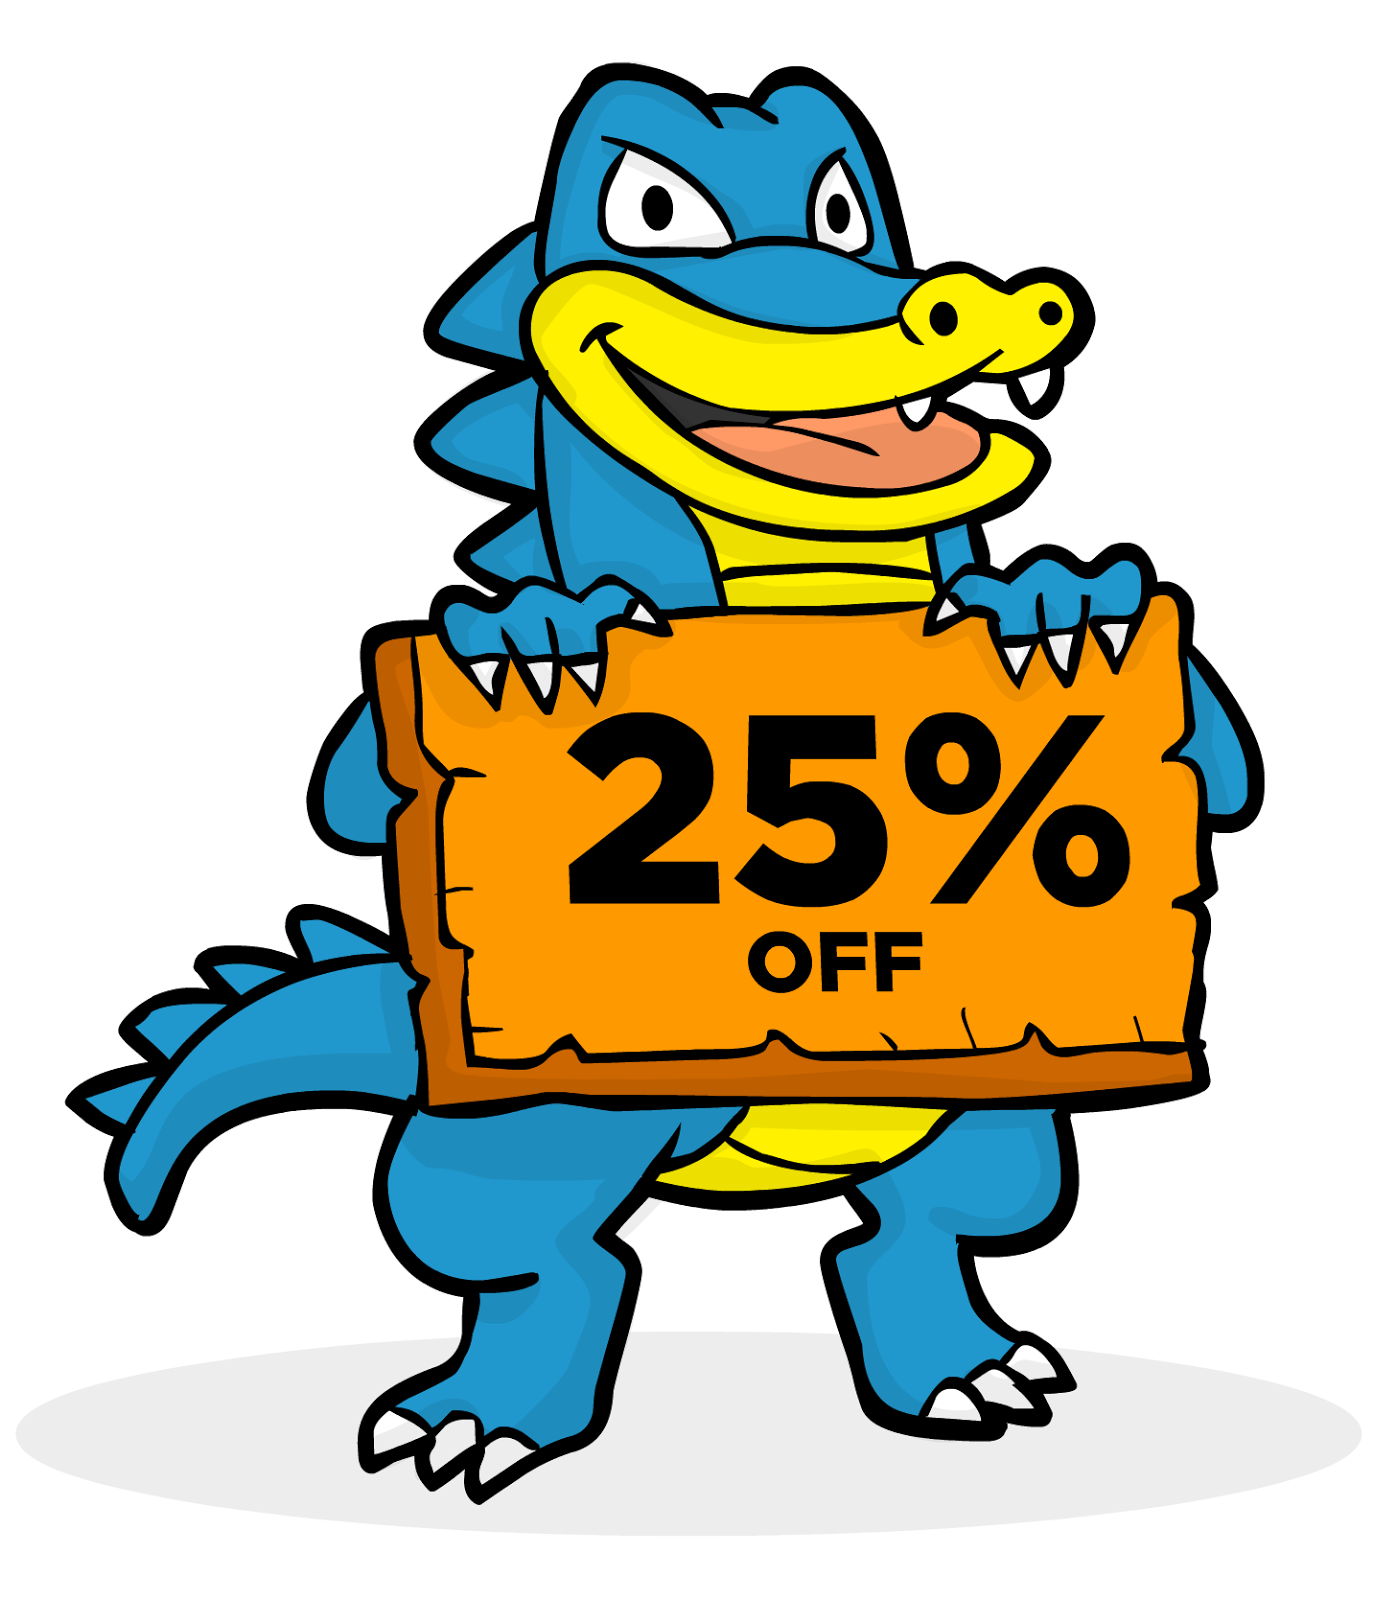 All New HostGator Coupon Code For 25% Off ;January 2015